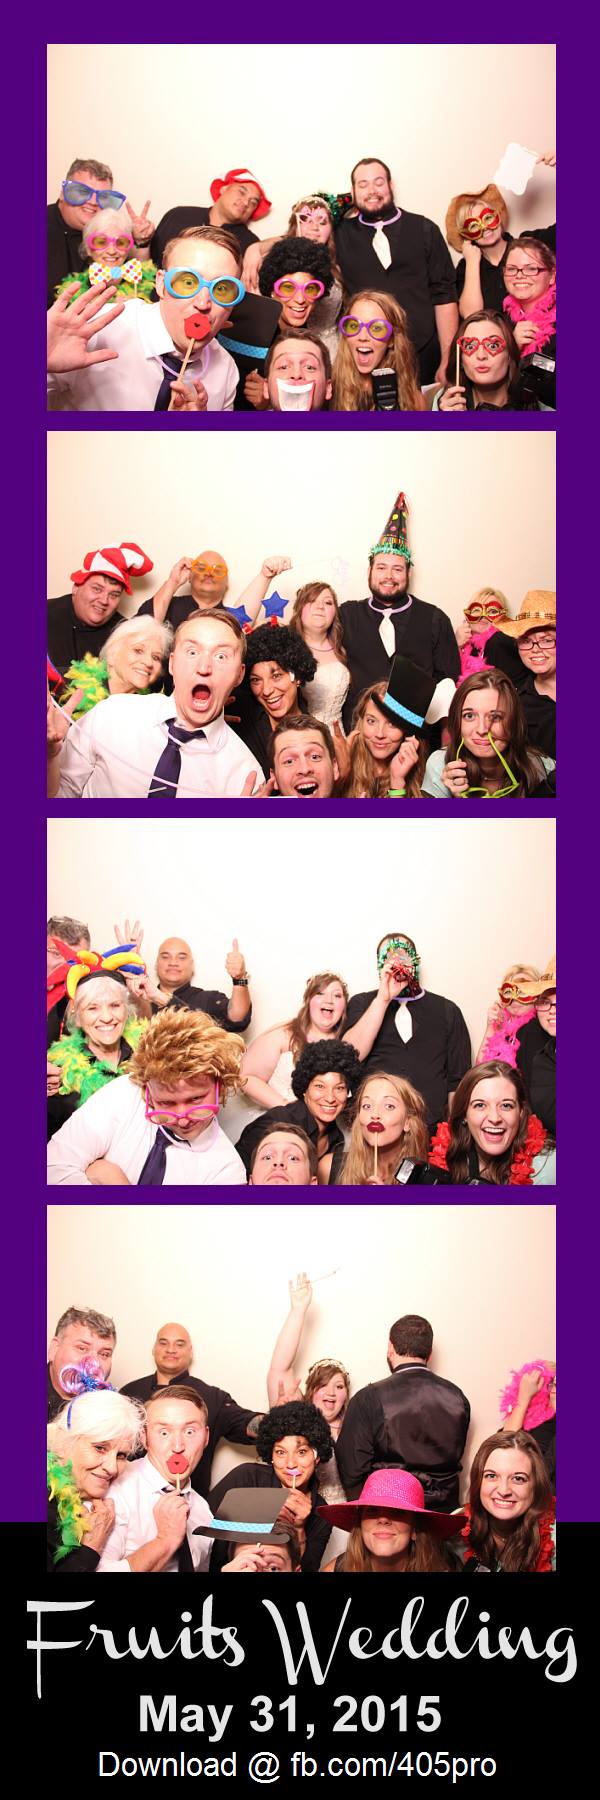 Oklahoma Norman Photo Booth Rentals Westminster Event Center